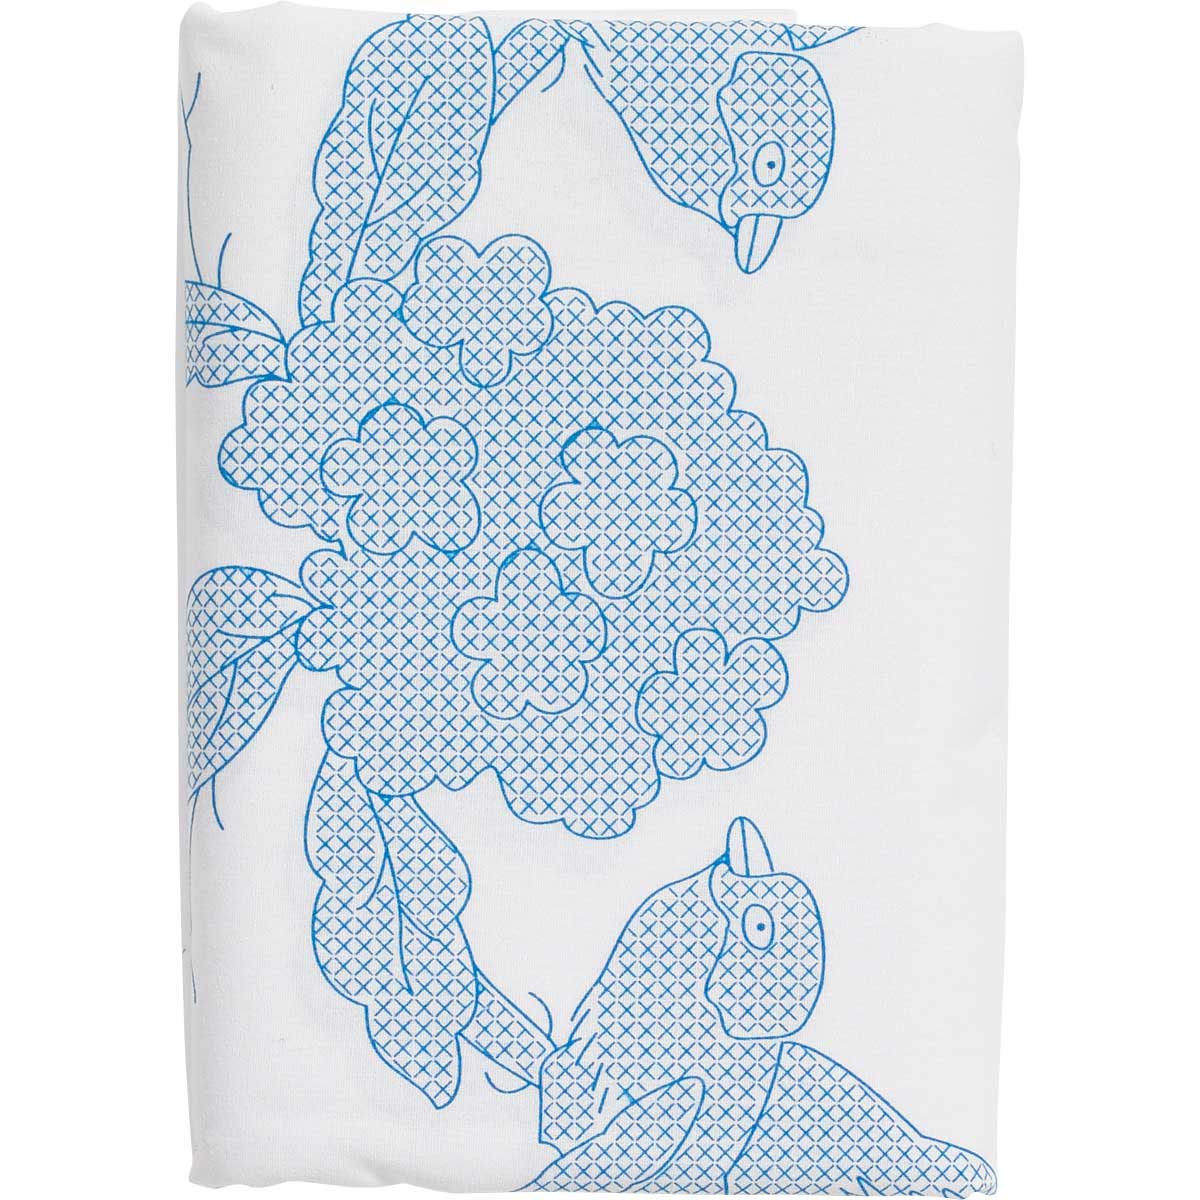 Bucilla ® Waverly ® Charmed Collection Stamped Pillowcase Pair - 47770